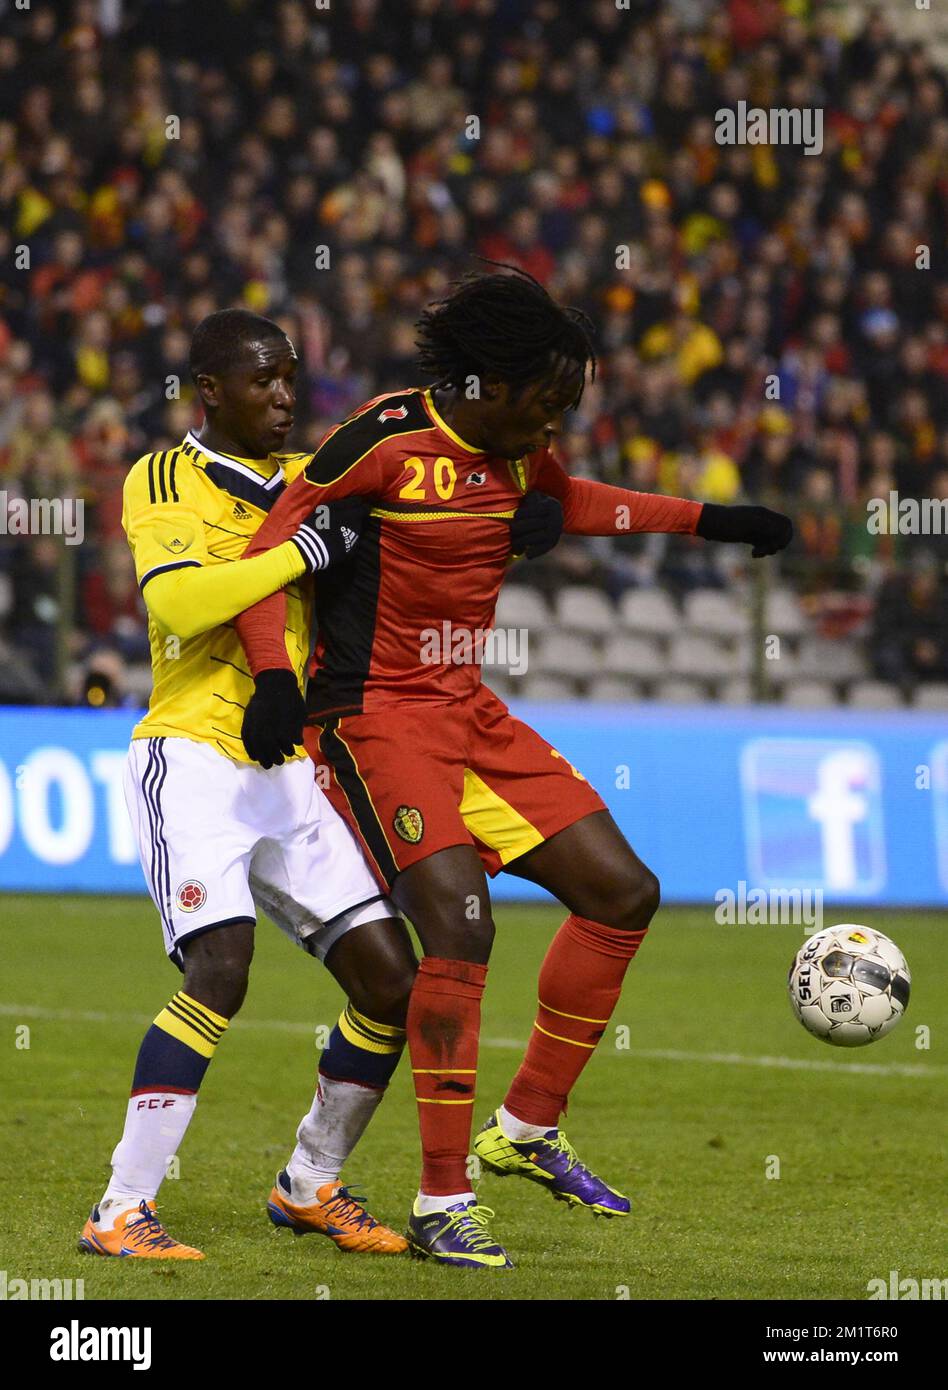 Colombia's Cristian Zapata and Belgium's Romelu Lukaku pictured during a friendly soccer game between the Belgian national soccer team Red Devils and Colombia, at the Koning Boudewijn Stadion - Stade Roi Baudouin in Brussels, on Thursday 14 November 2013. BELGA PHOTO DIRK WAEM Stock Photo